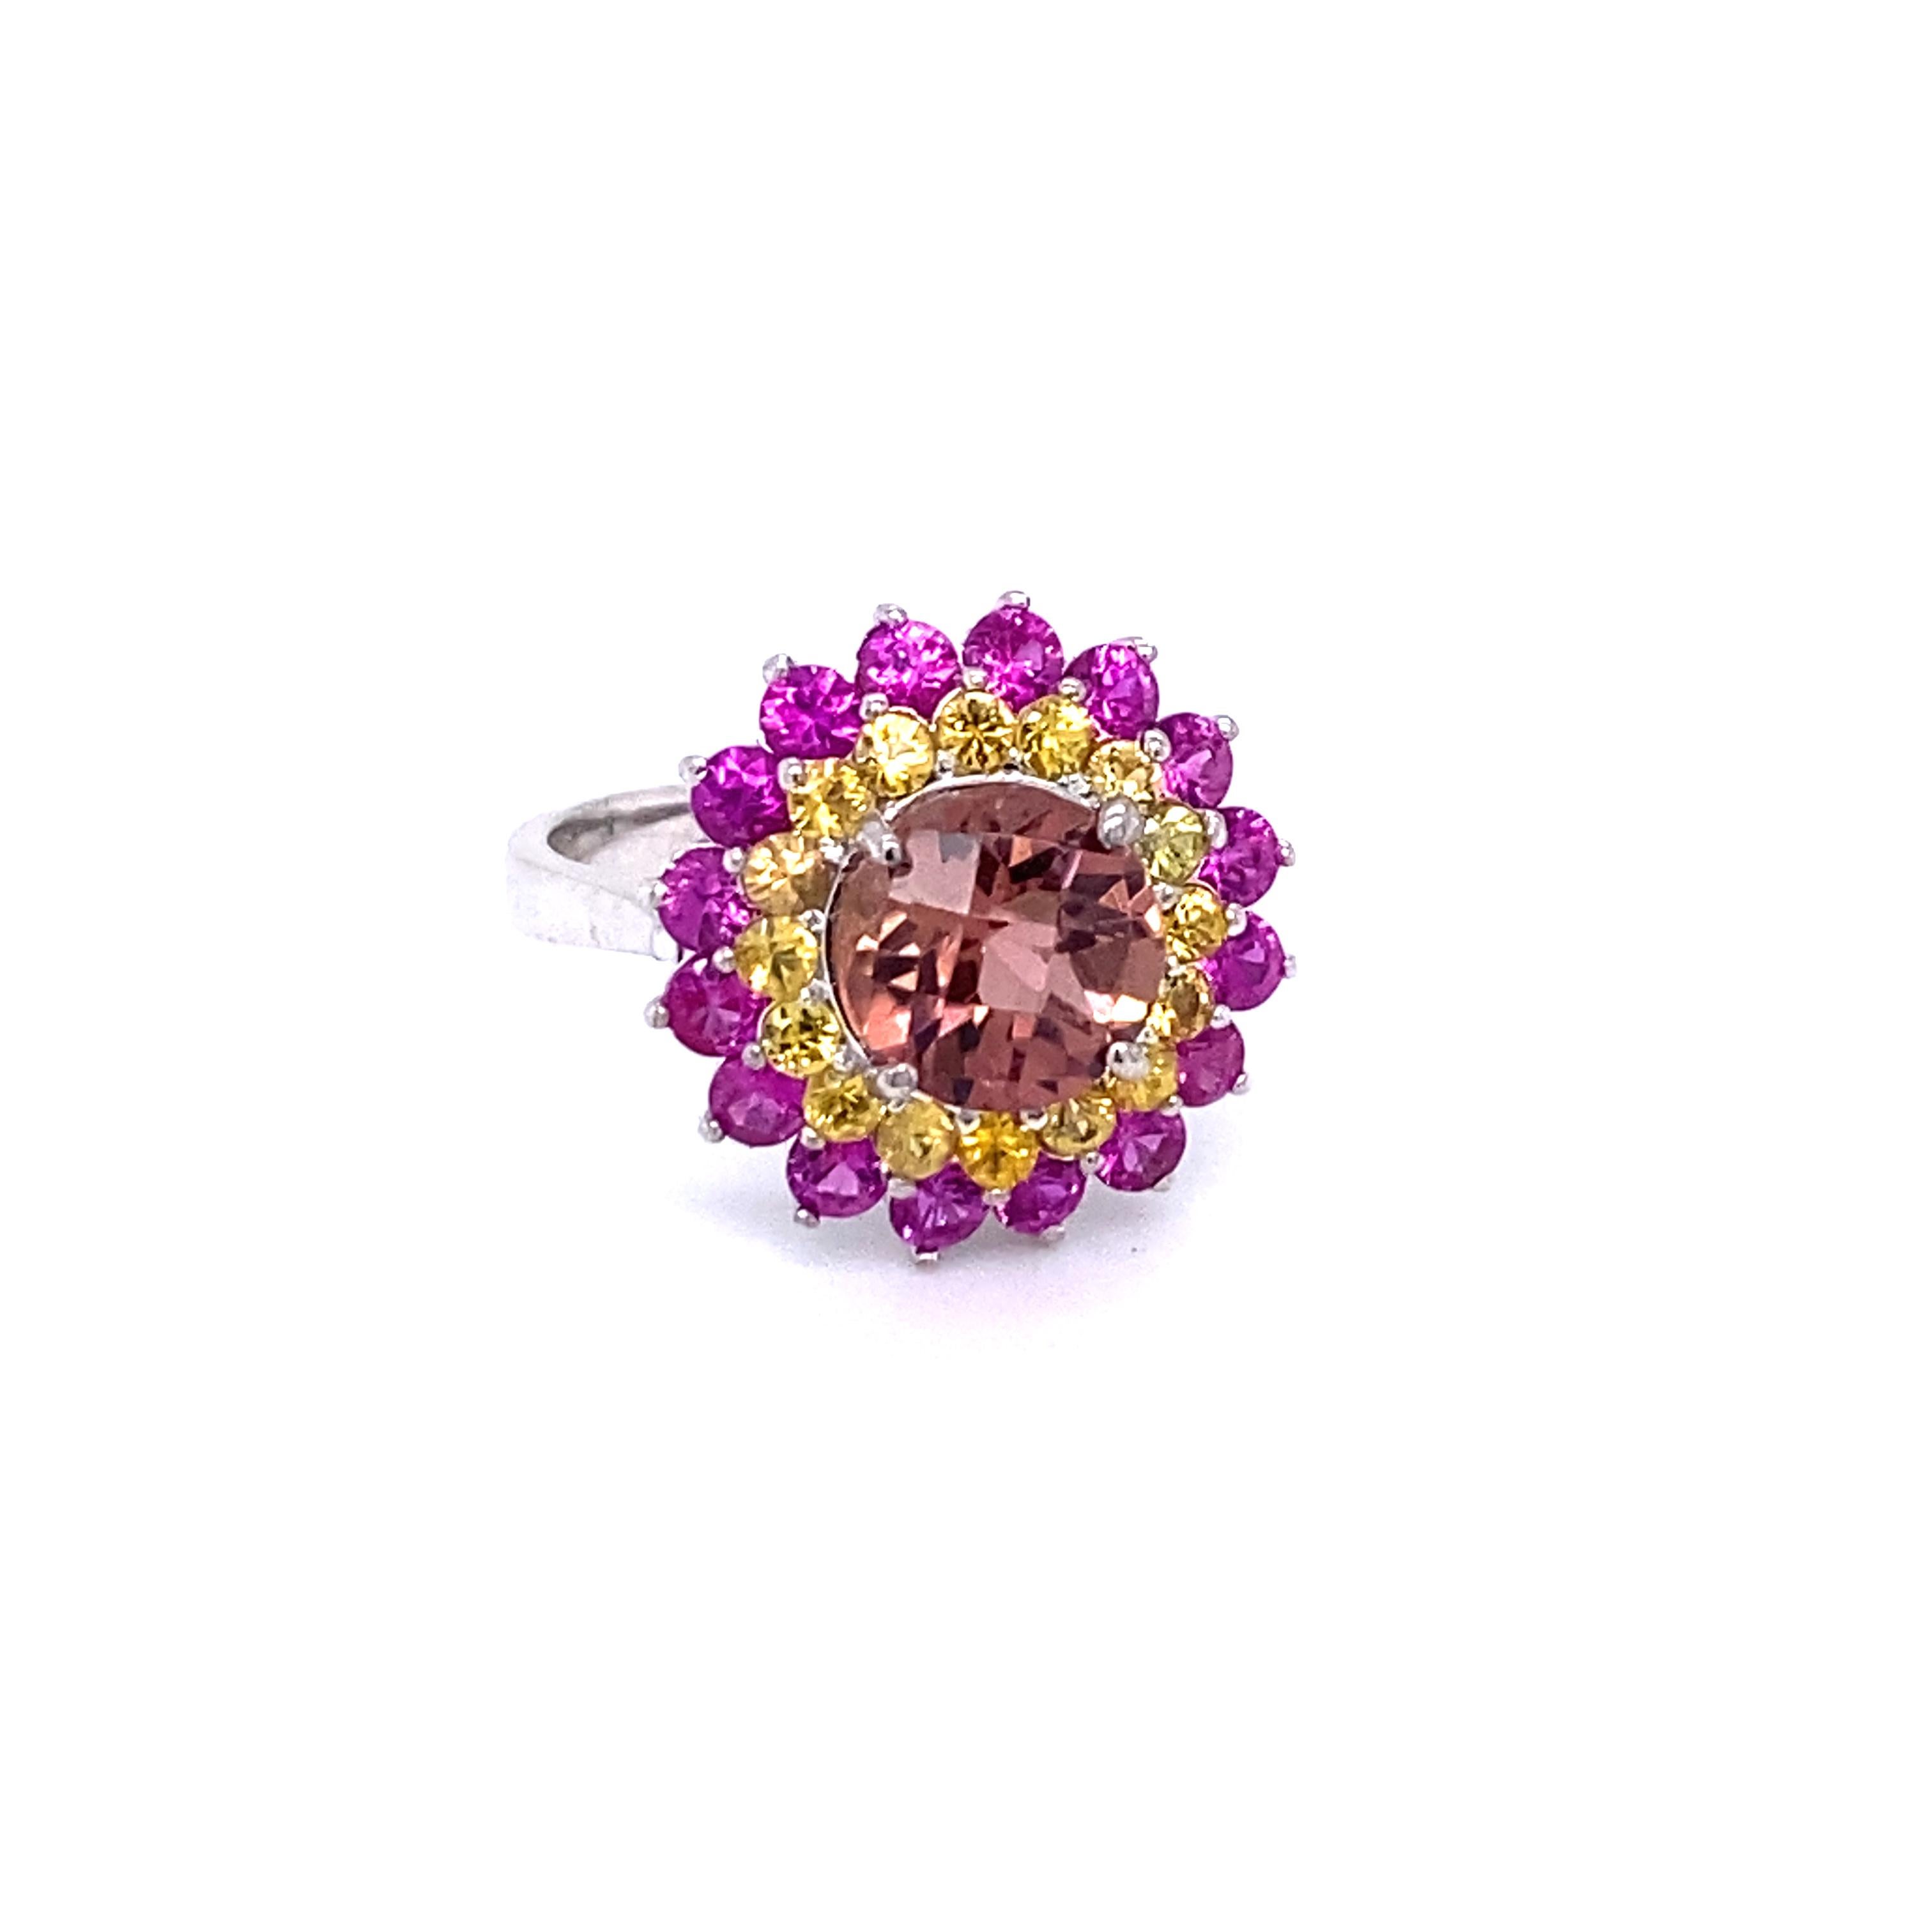 4.29 Carat Tourmaline Sapphire 14 Karat White Gold Cocktail Ring

This ring has a Checkered Round Cut 2.17 Carat Tourmaline that is set in the center of the ring and is surrounded by 32 Yellow and Pink Sapphires that weigh 2.12 Carats.  The total